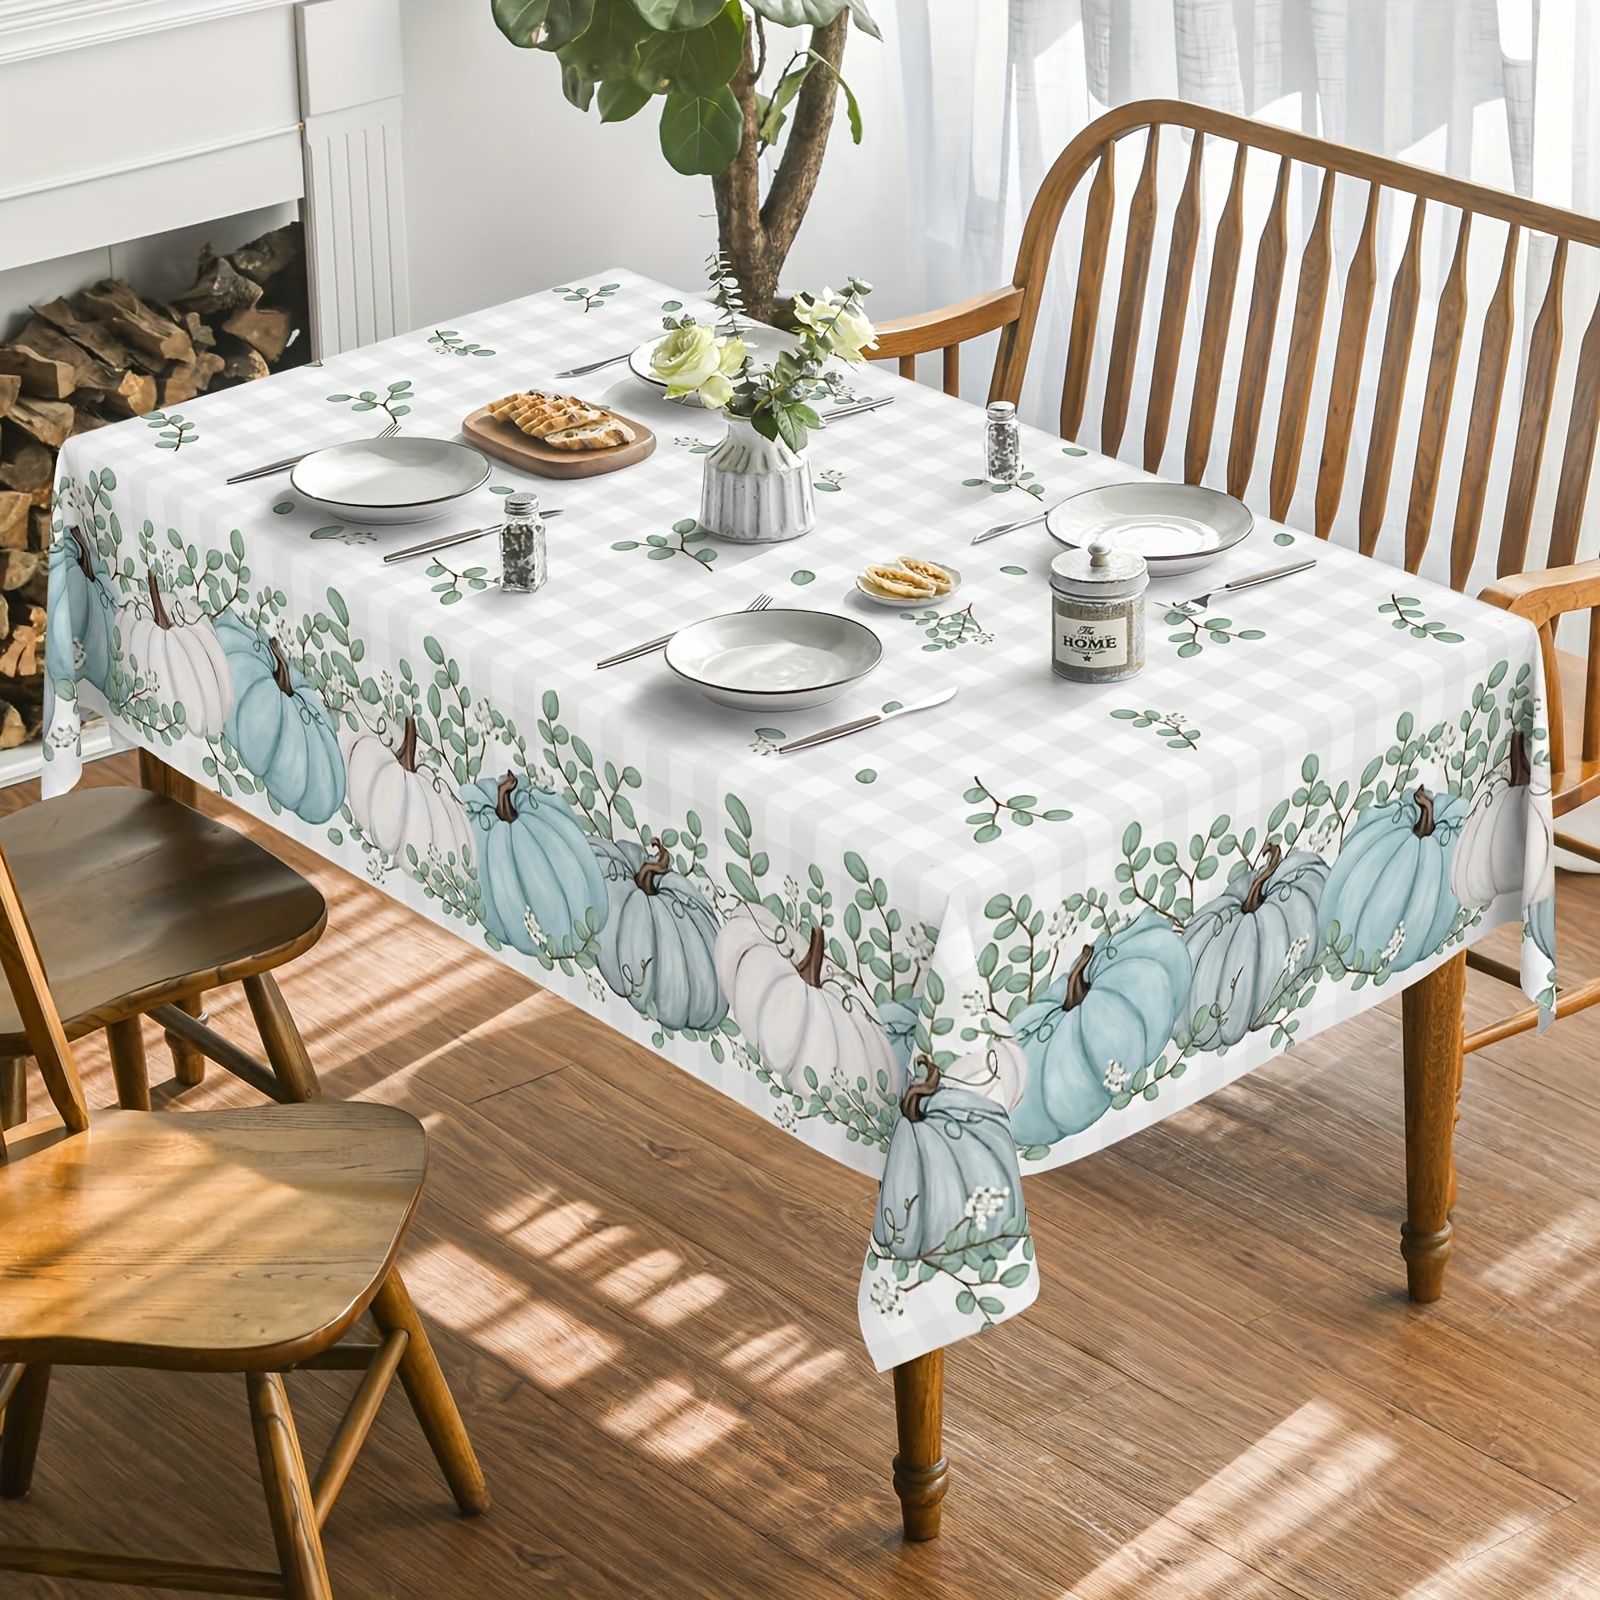 

Festive Autumn Tablecloth: 55" X 71" Rectangular, Thanksgiving Harvest Blue Pumpkin Grid Cover For Parties, Picnics, And Dinners